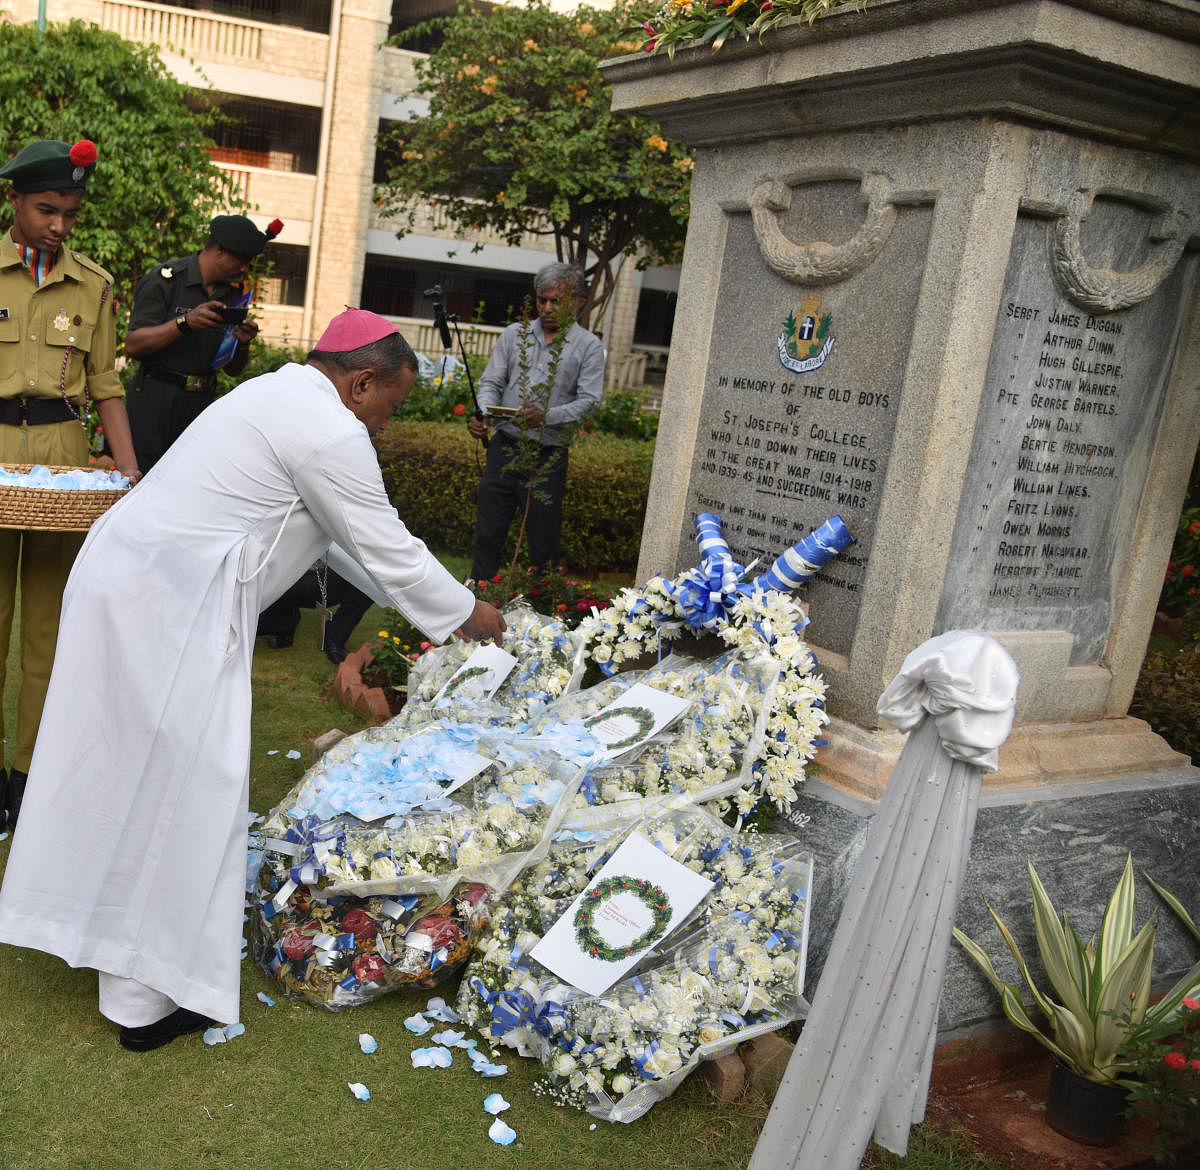 The Archbishop of Bangalore Peter Machado pays tribute at the war memorial at Old boy martyrs at St Joseph's Boys High School in Bengaluru on May 25, 2019. (DH PHOTO/JANARDHAN B K)